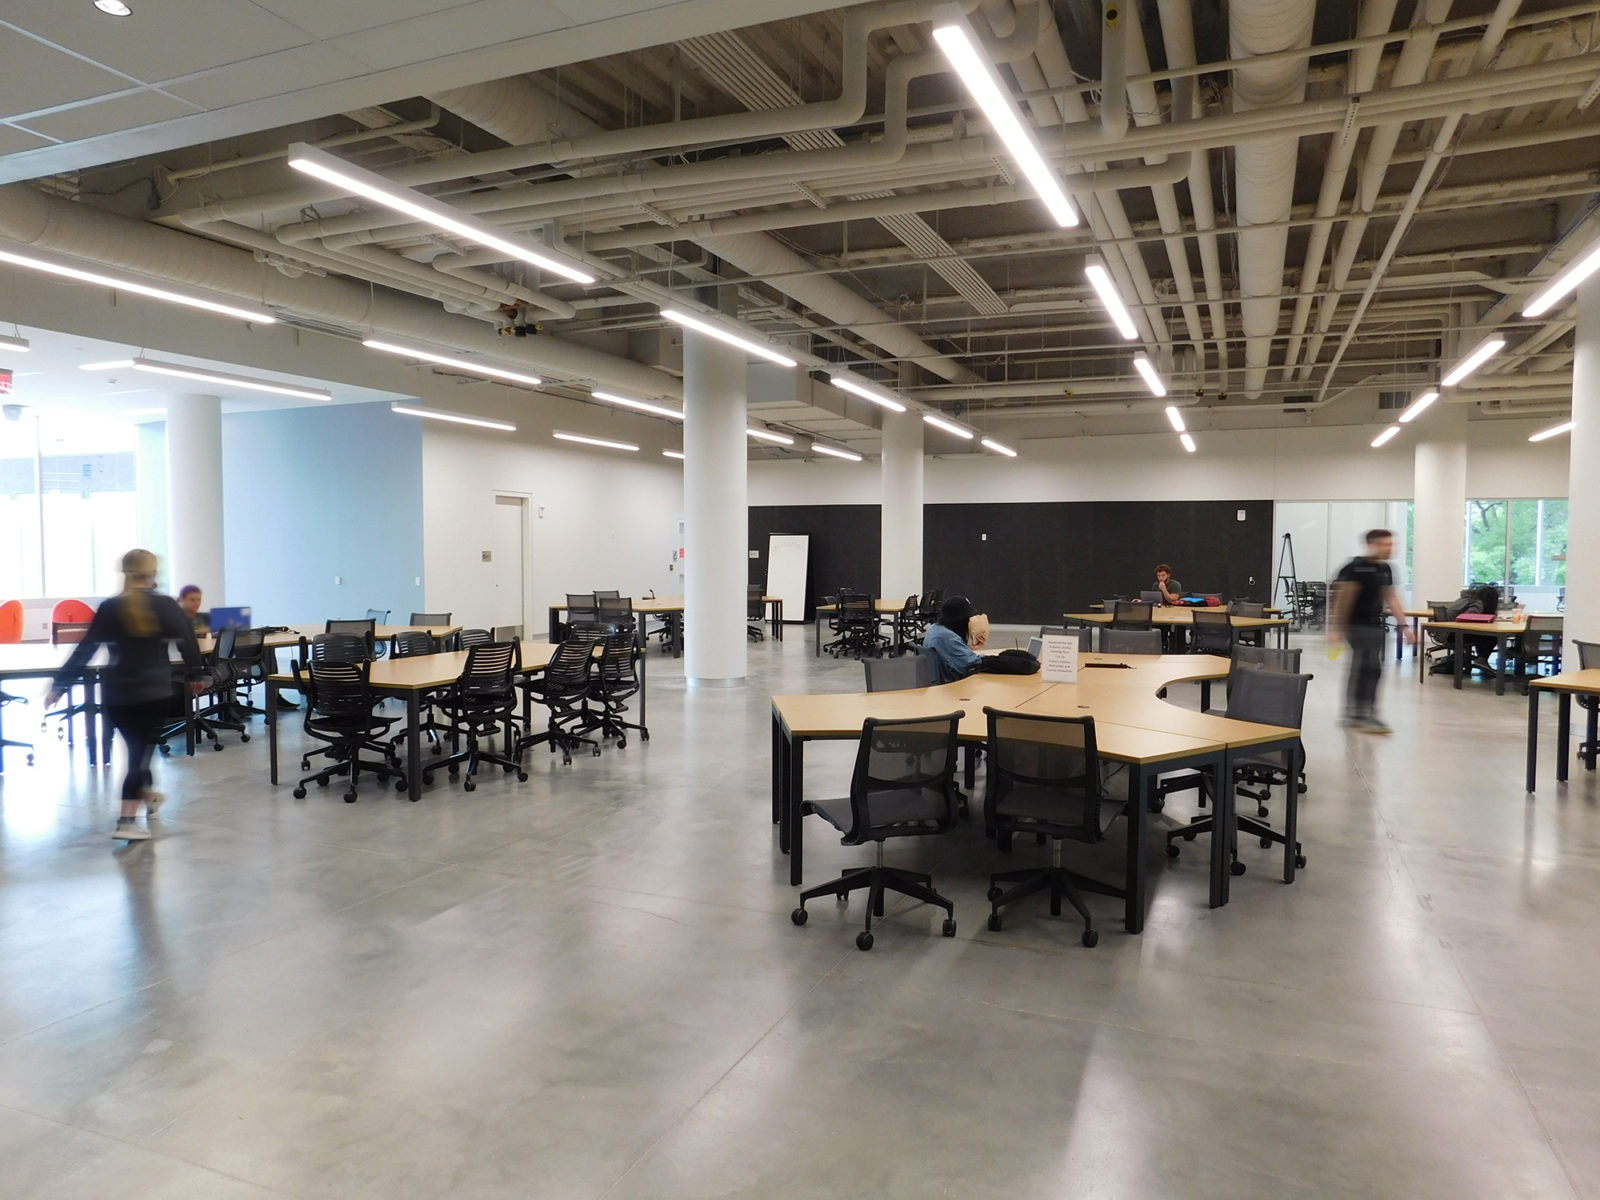 Open space with 120-degree workstations for students, including black mesh back task chairs. Exposed ceilings and concrete floors.